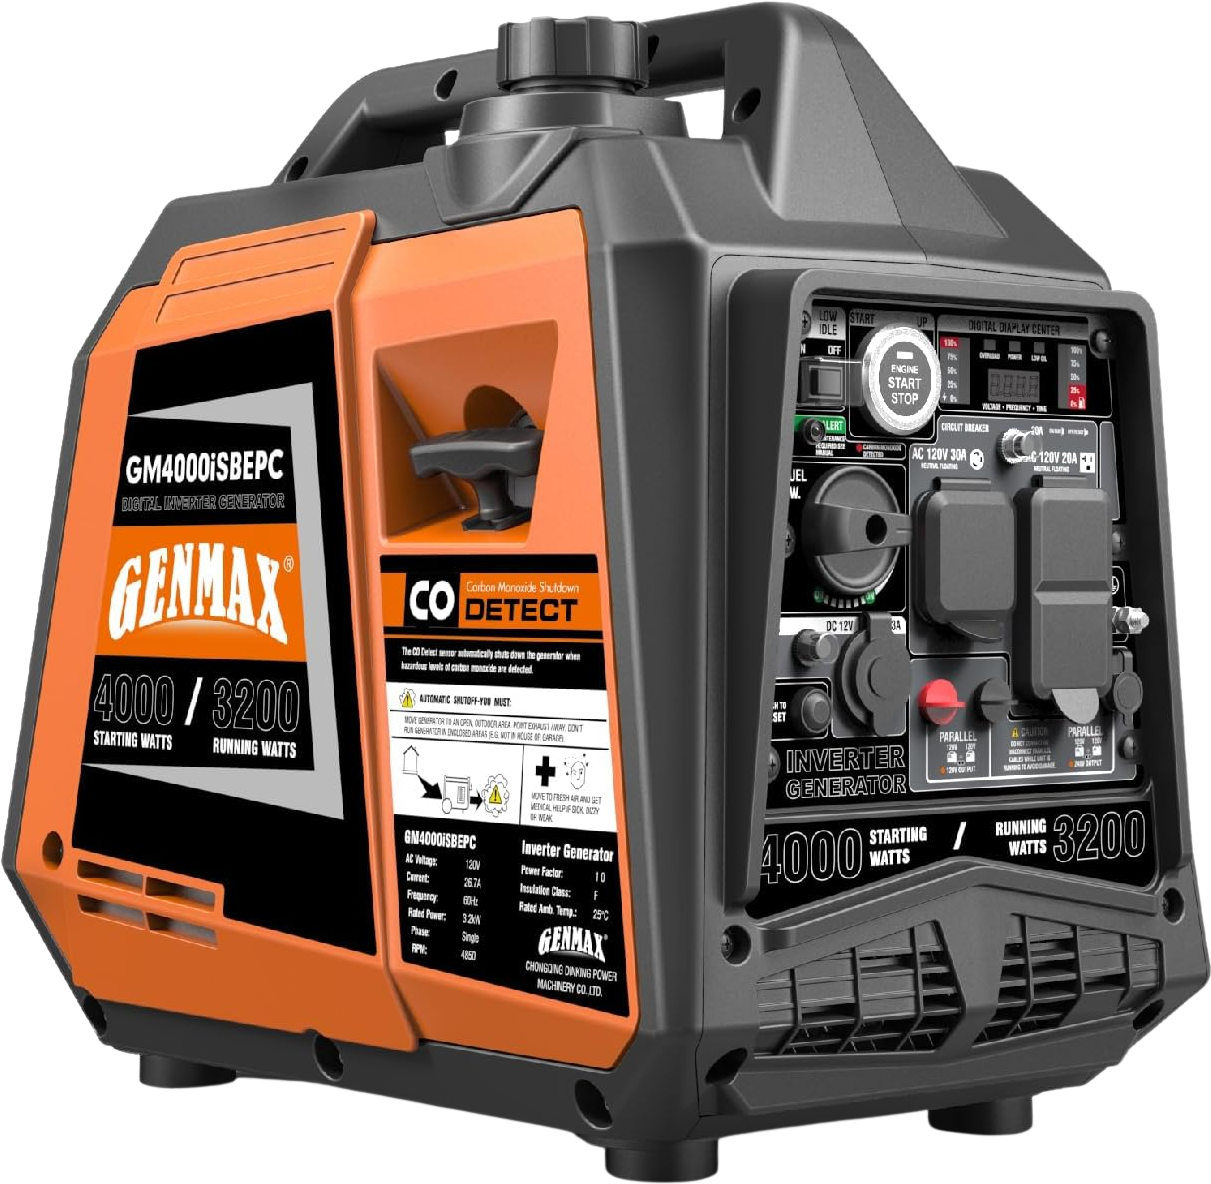 GENMAX GM4000iSBEPC 3200W/4000W 26.7 Amp Electric Start Gas Inverter Generator Parallel Ready with CO Detect New